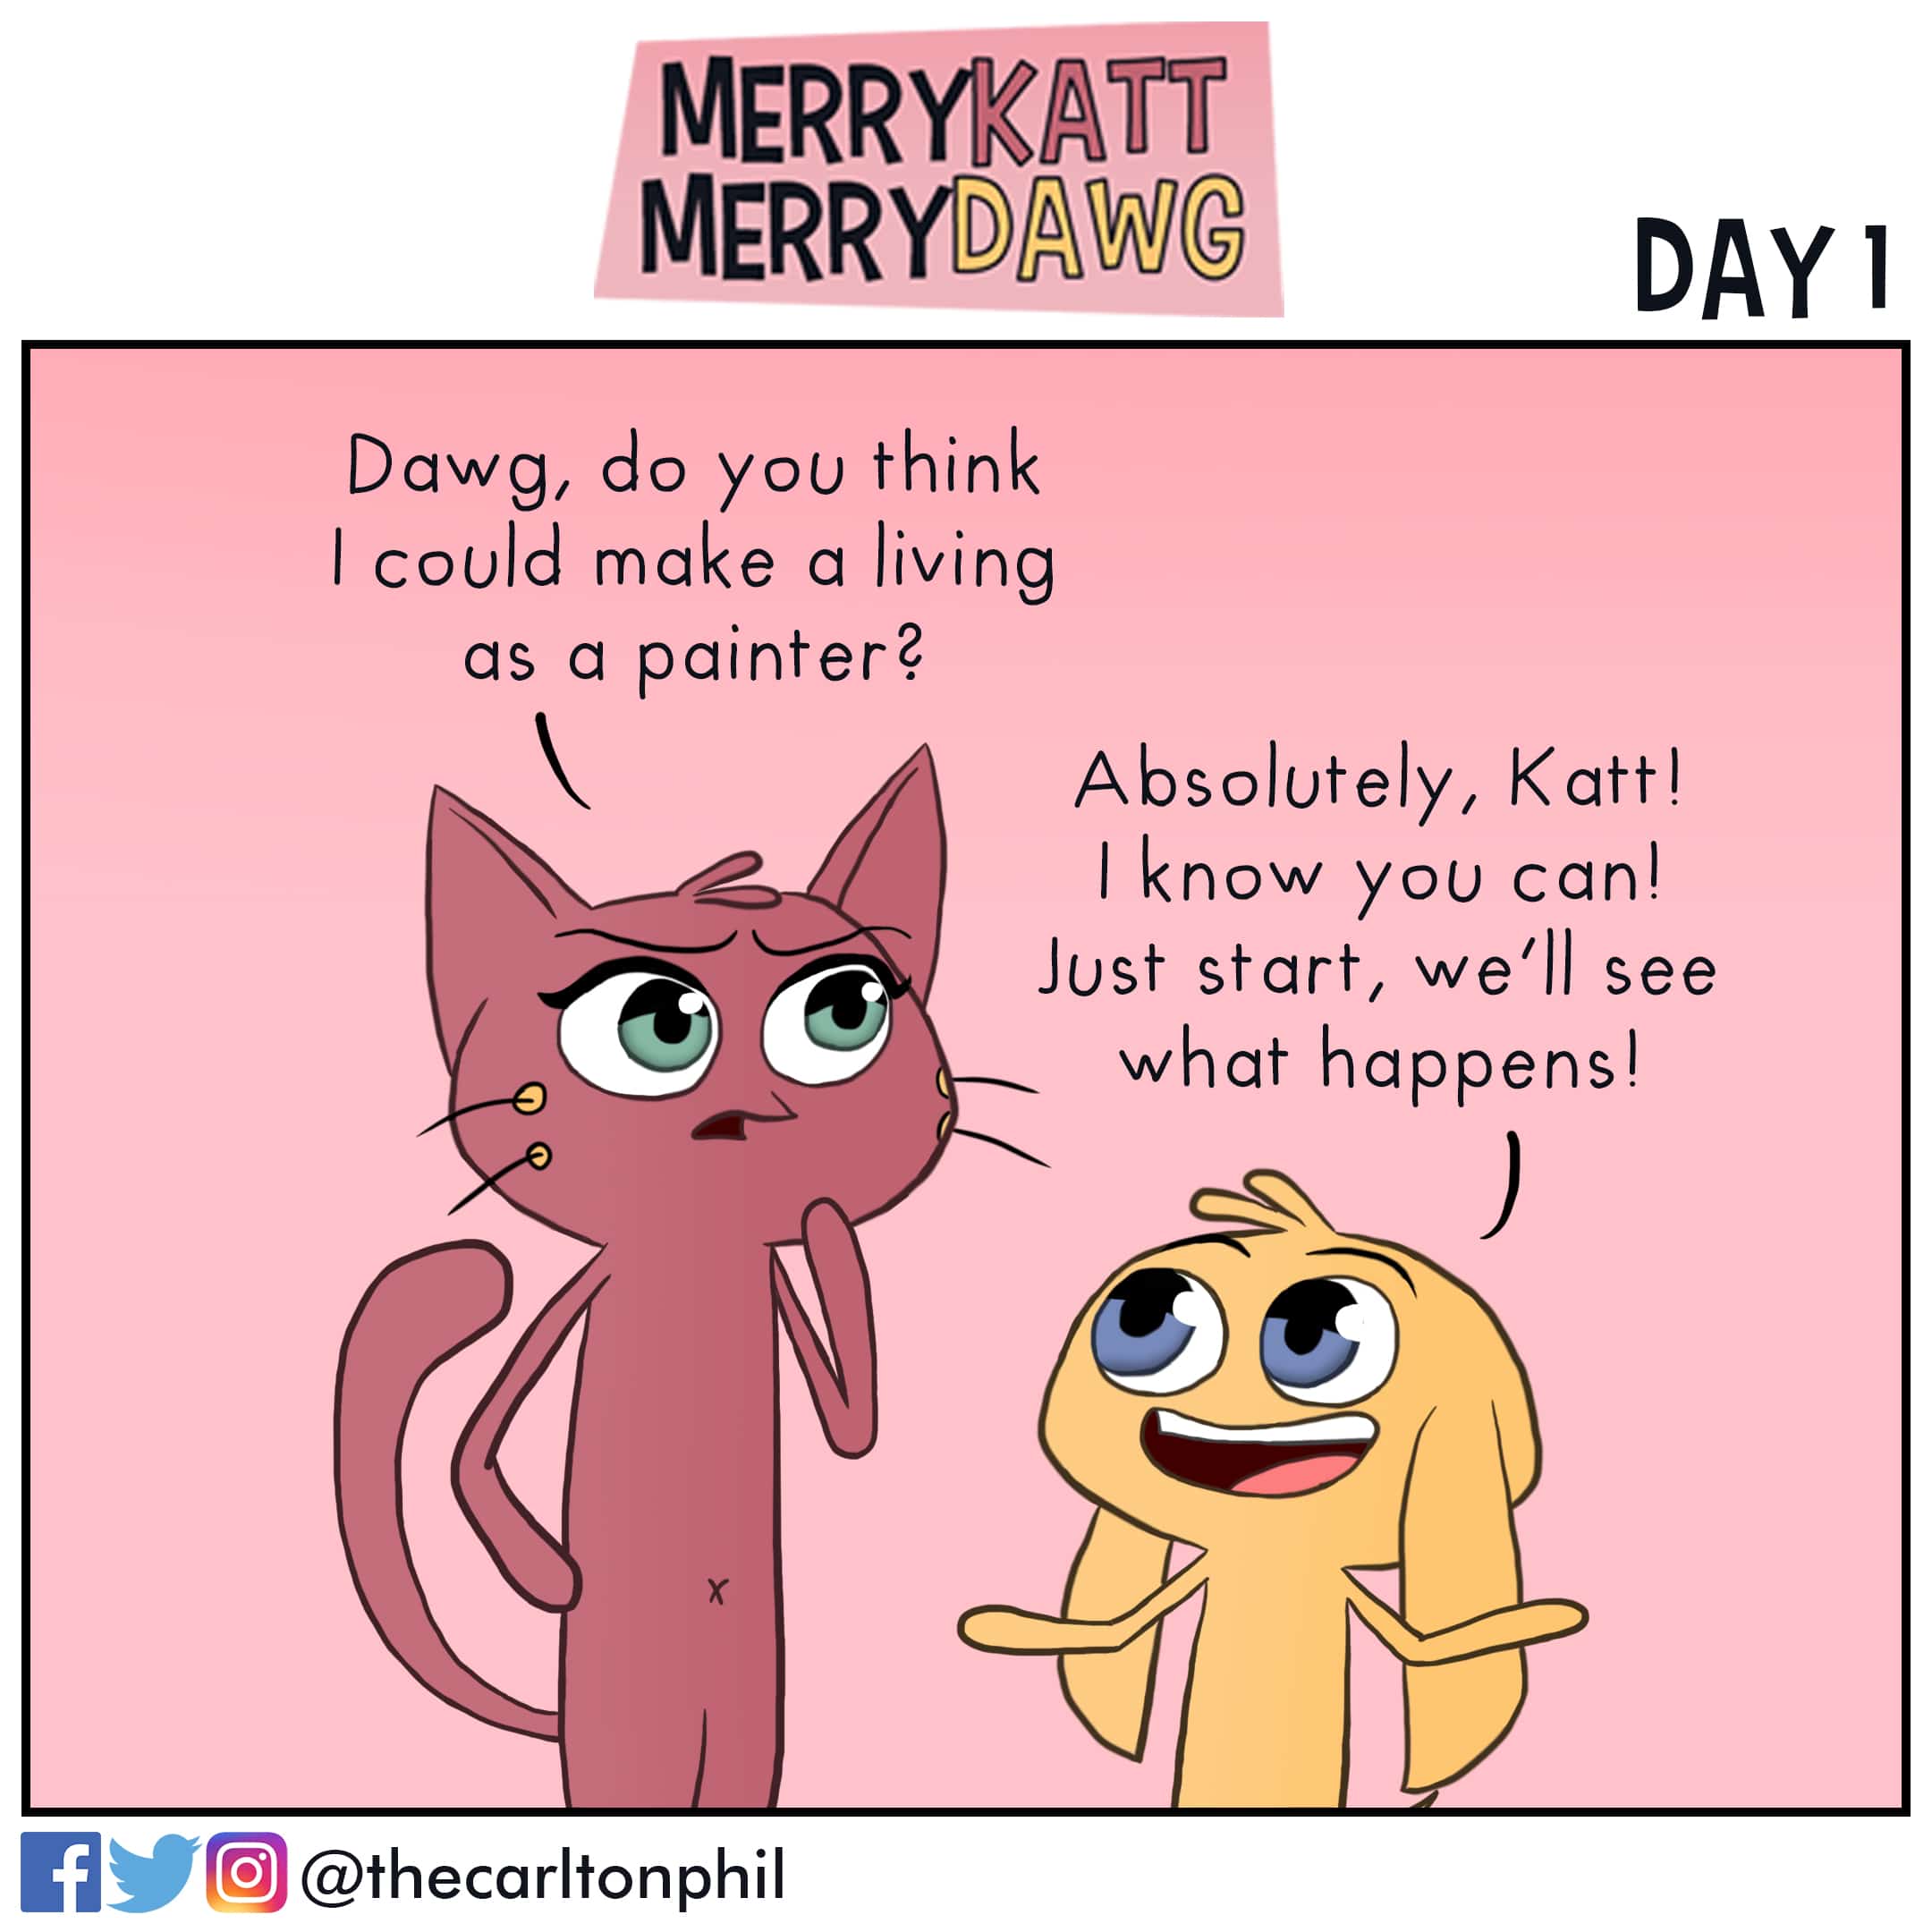 comics comics comics text: MERRYKAT MERRYDAWC Dawg, do you think I could make a Jiving as a painter? DAY I Absolutely, Katt! I know you can! JUS t start/ see what happens! @thecarltonphil 